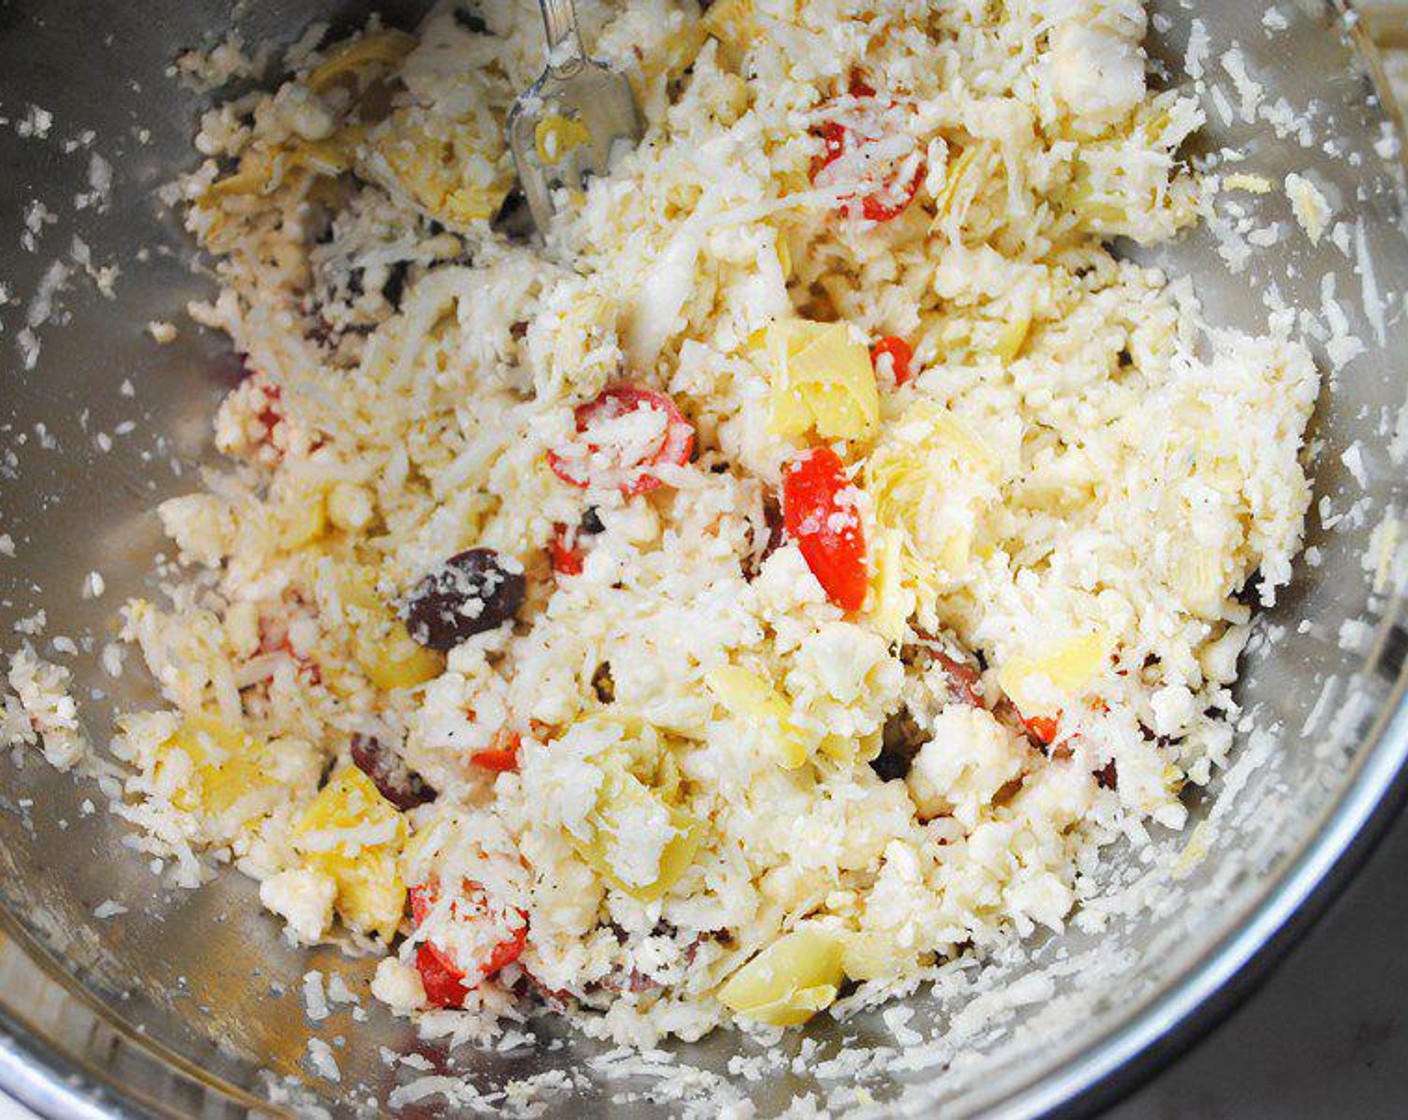 step 1 Place the Cauliflower (1 head) into a bowl and mix it with the Grape Tomatoes (1/3 cup), Kalamata Olives (1/4 cup), Feta Cheese (1/4 cup), Artichoke Hearts (4), and Greek Seasoning (1/2 Tbsp).